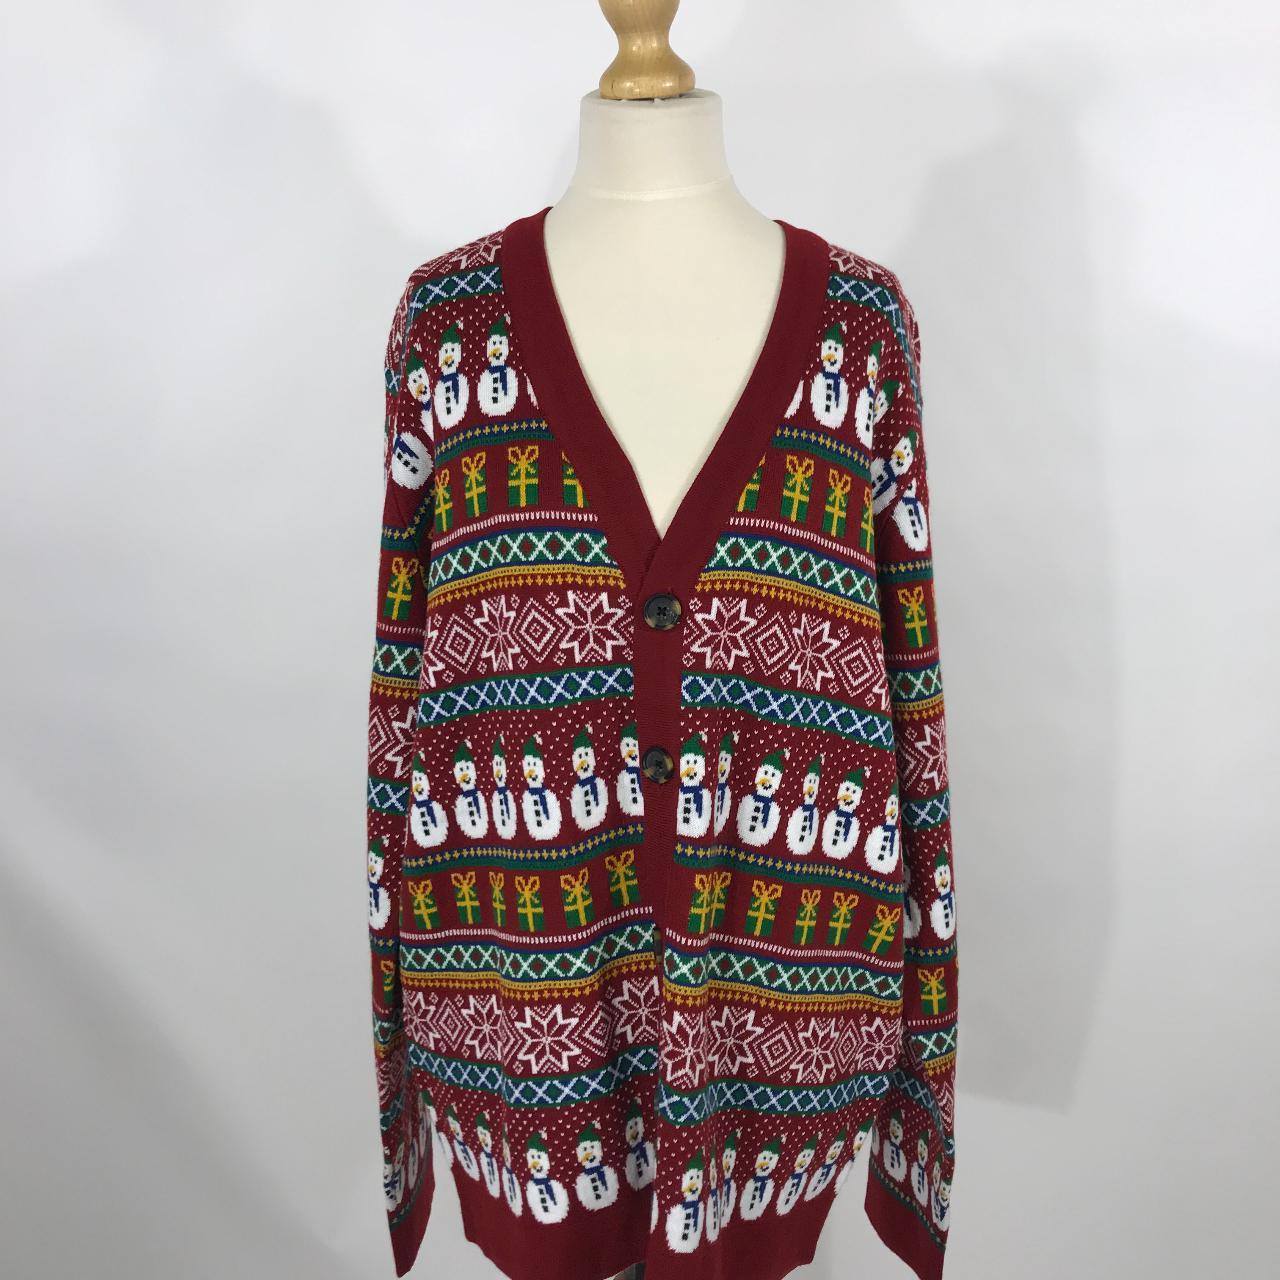 Product Image 1 - Christmas Cardigan 
Size XL
Pit to